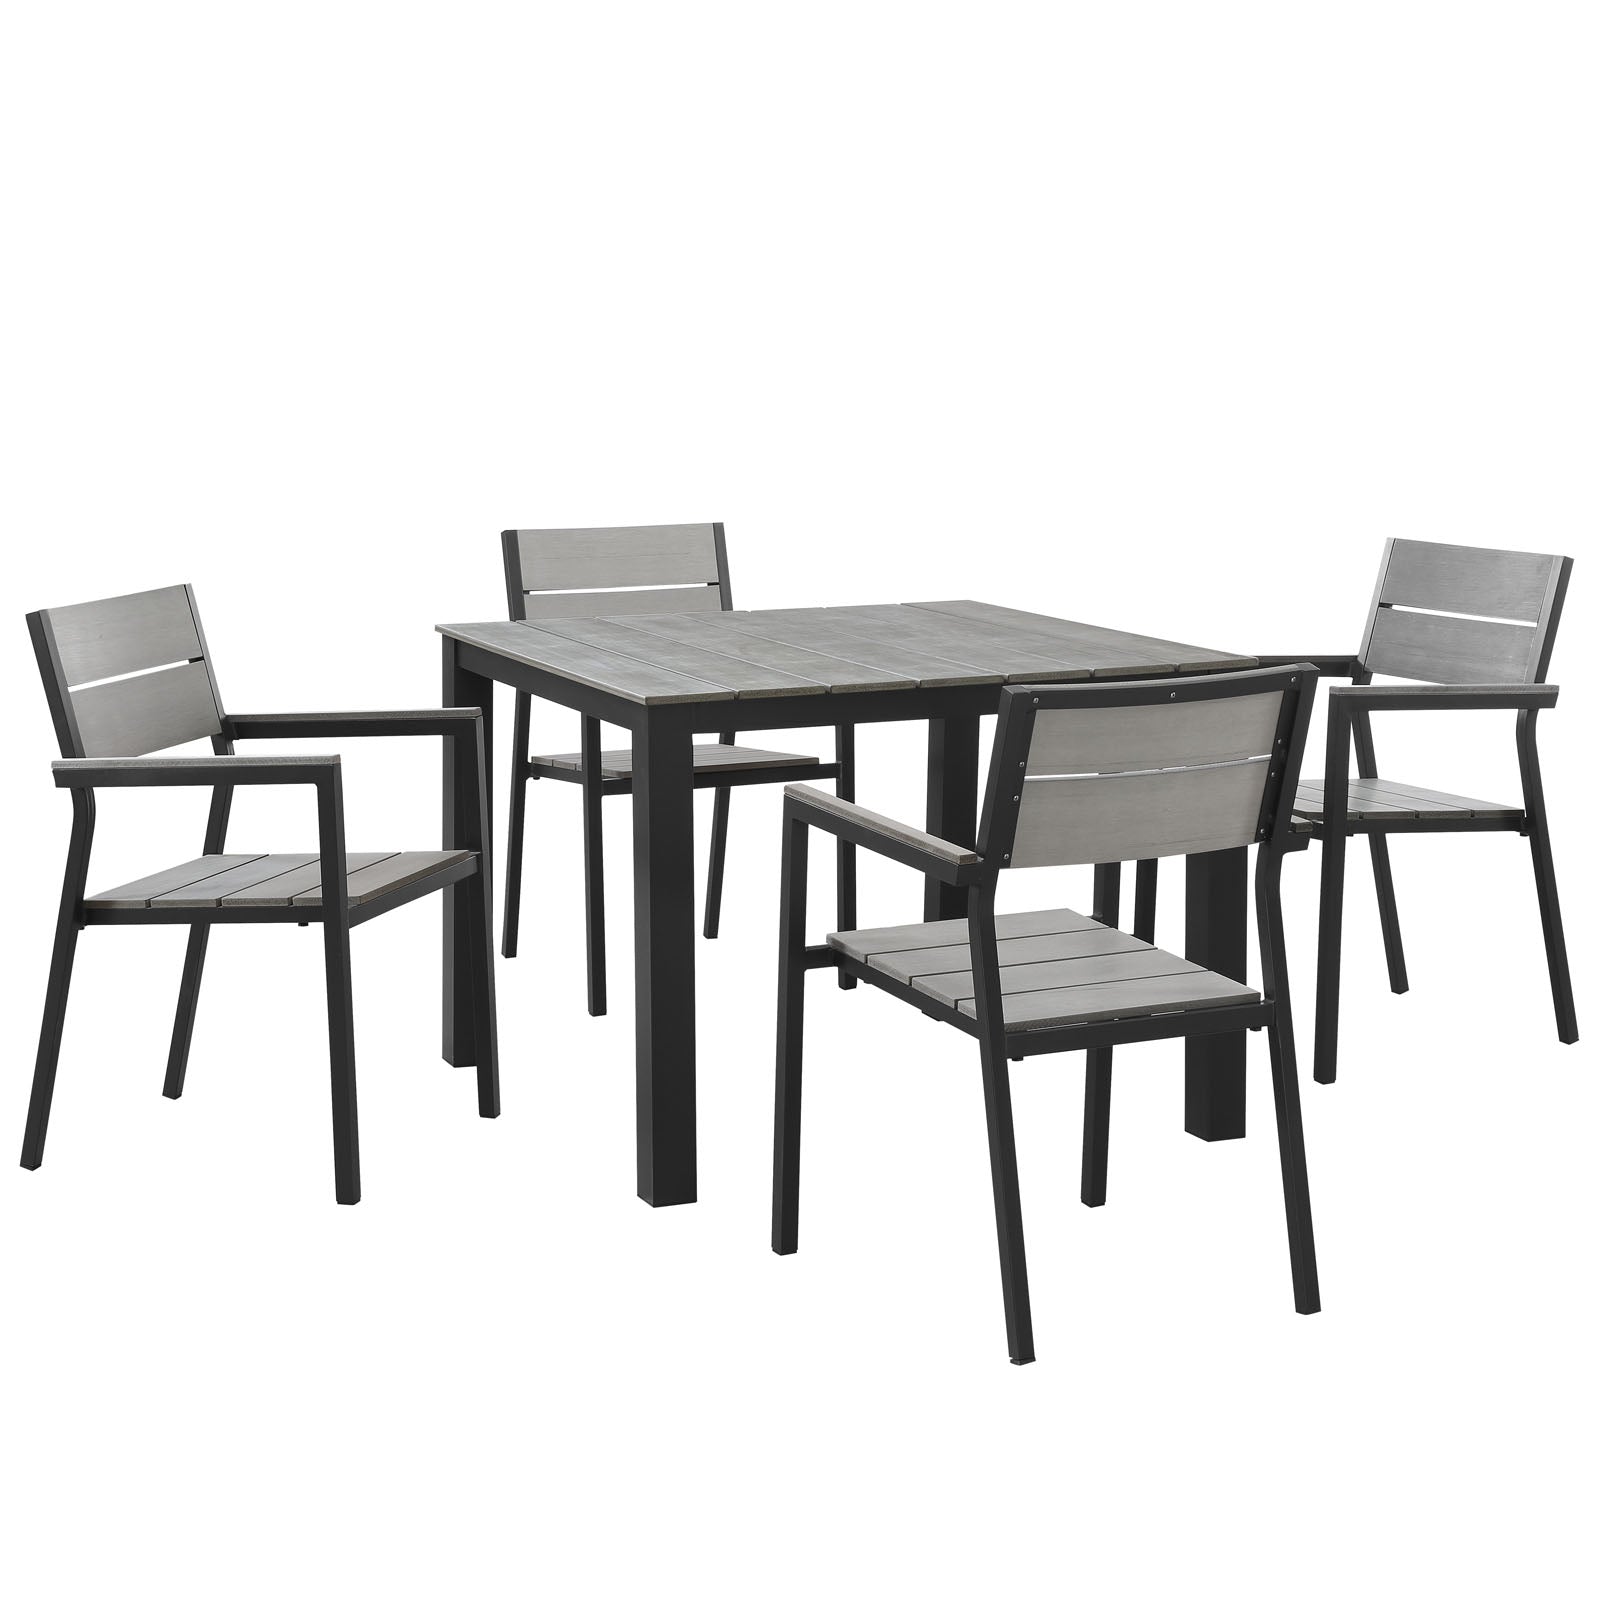 Maine 5 Piece With 40" Table outdoor Patio Dining Set - Wooden Dining Room Table